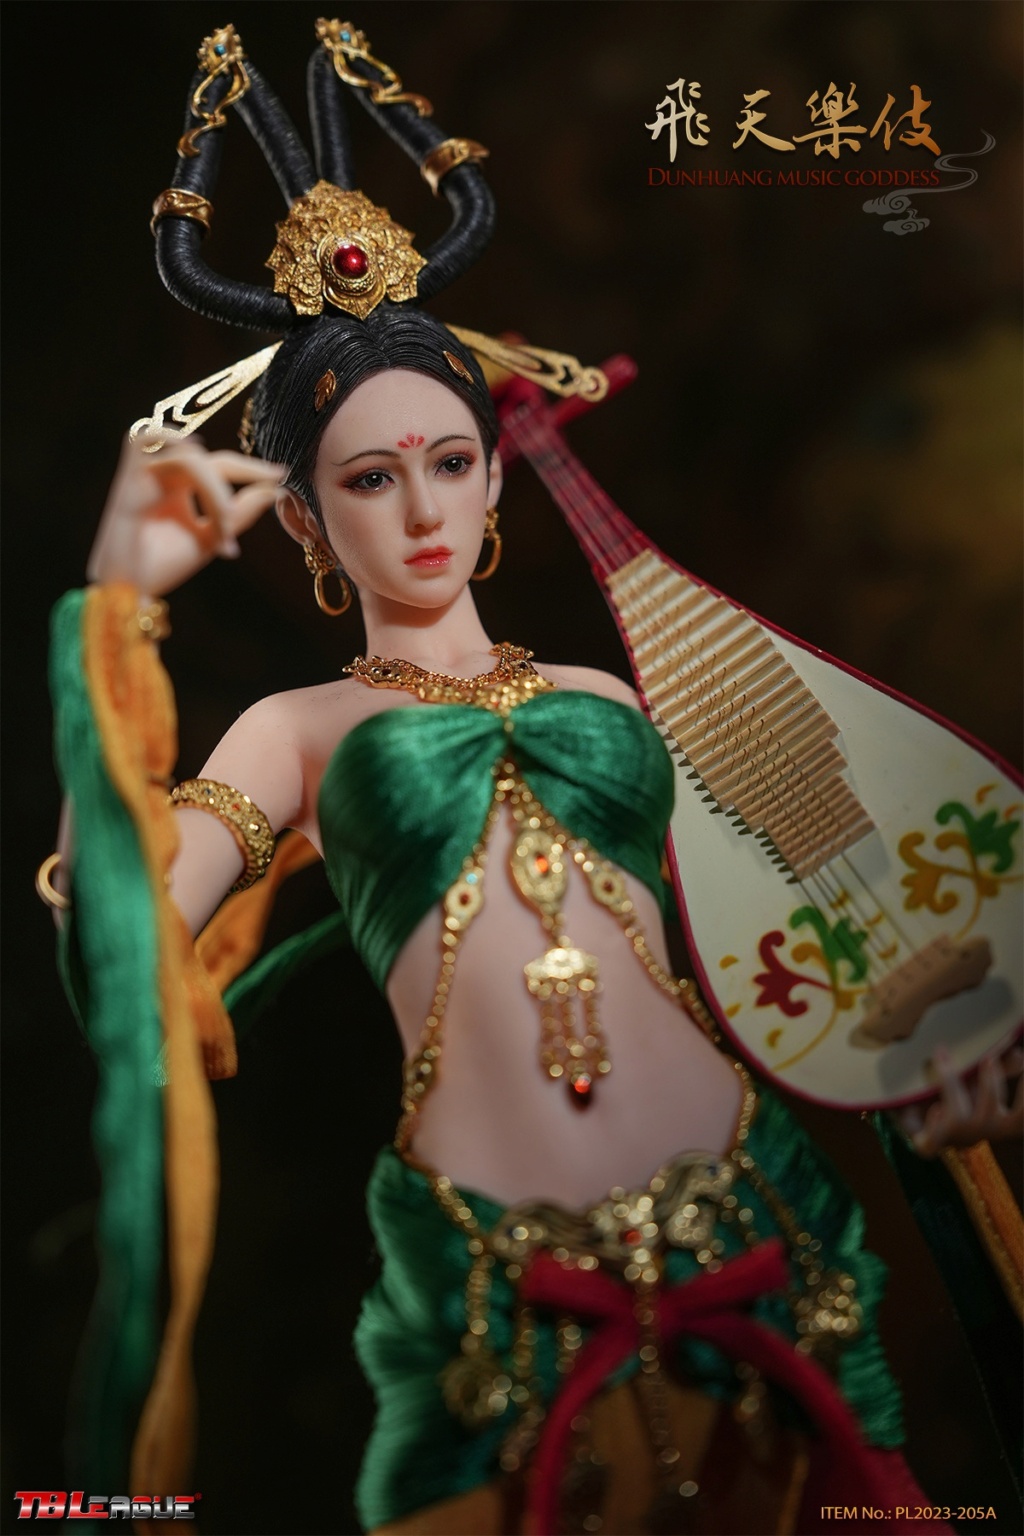 Dunhuang - NEW PRODUCT: TBLeague: PL2023-205 1/6 Scale Dunhuang Music Goddess (2 versions) 15121311